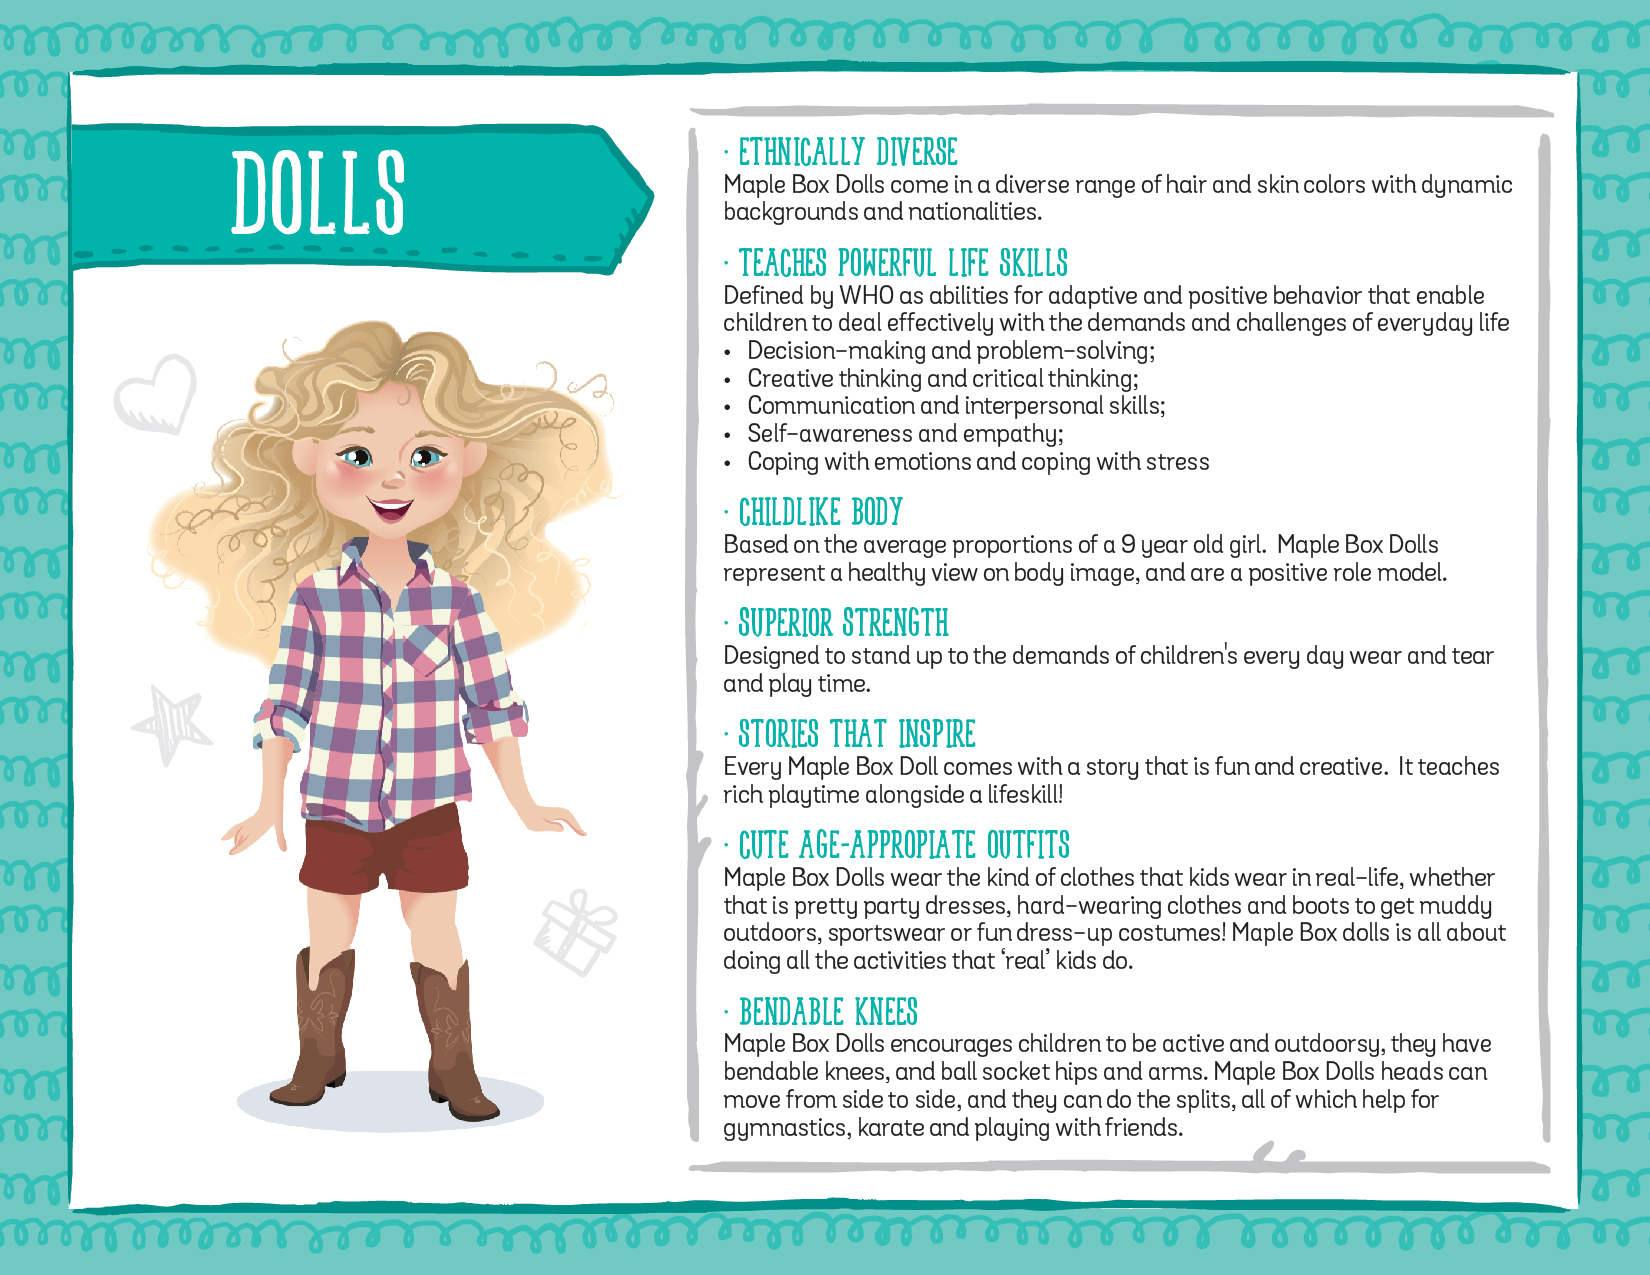 About The Dolls